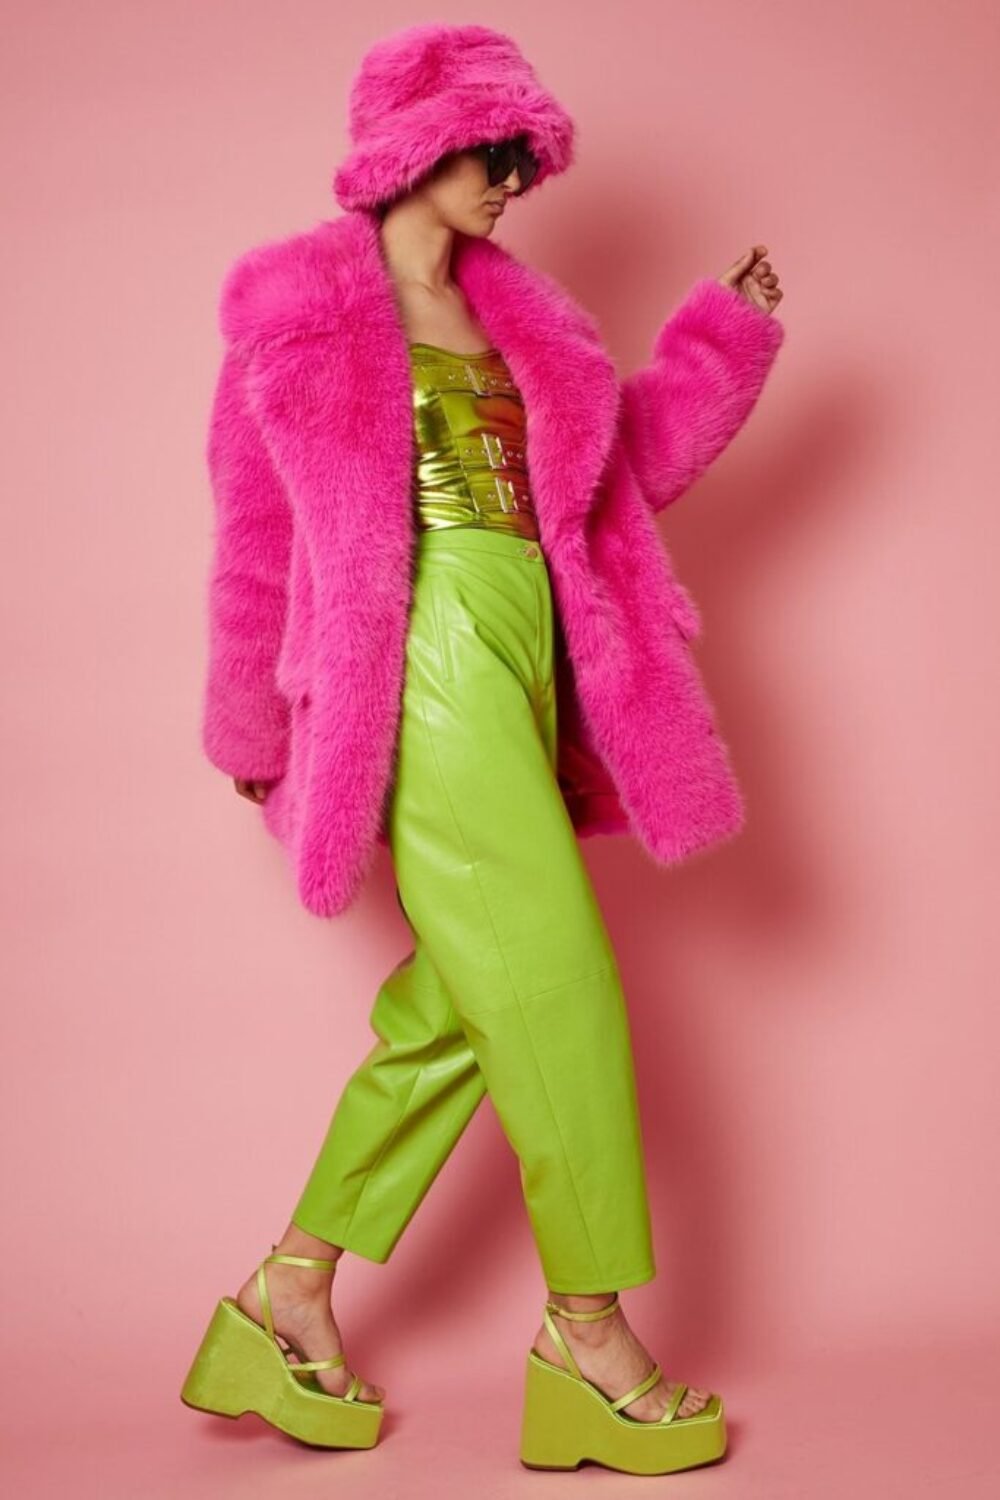 Shop Lux Faux Fur Fuchsia Pink Midi Coat and women's luxury and designer clothes at www.lux-apparel.co.uk